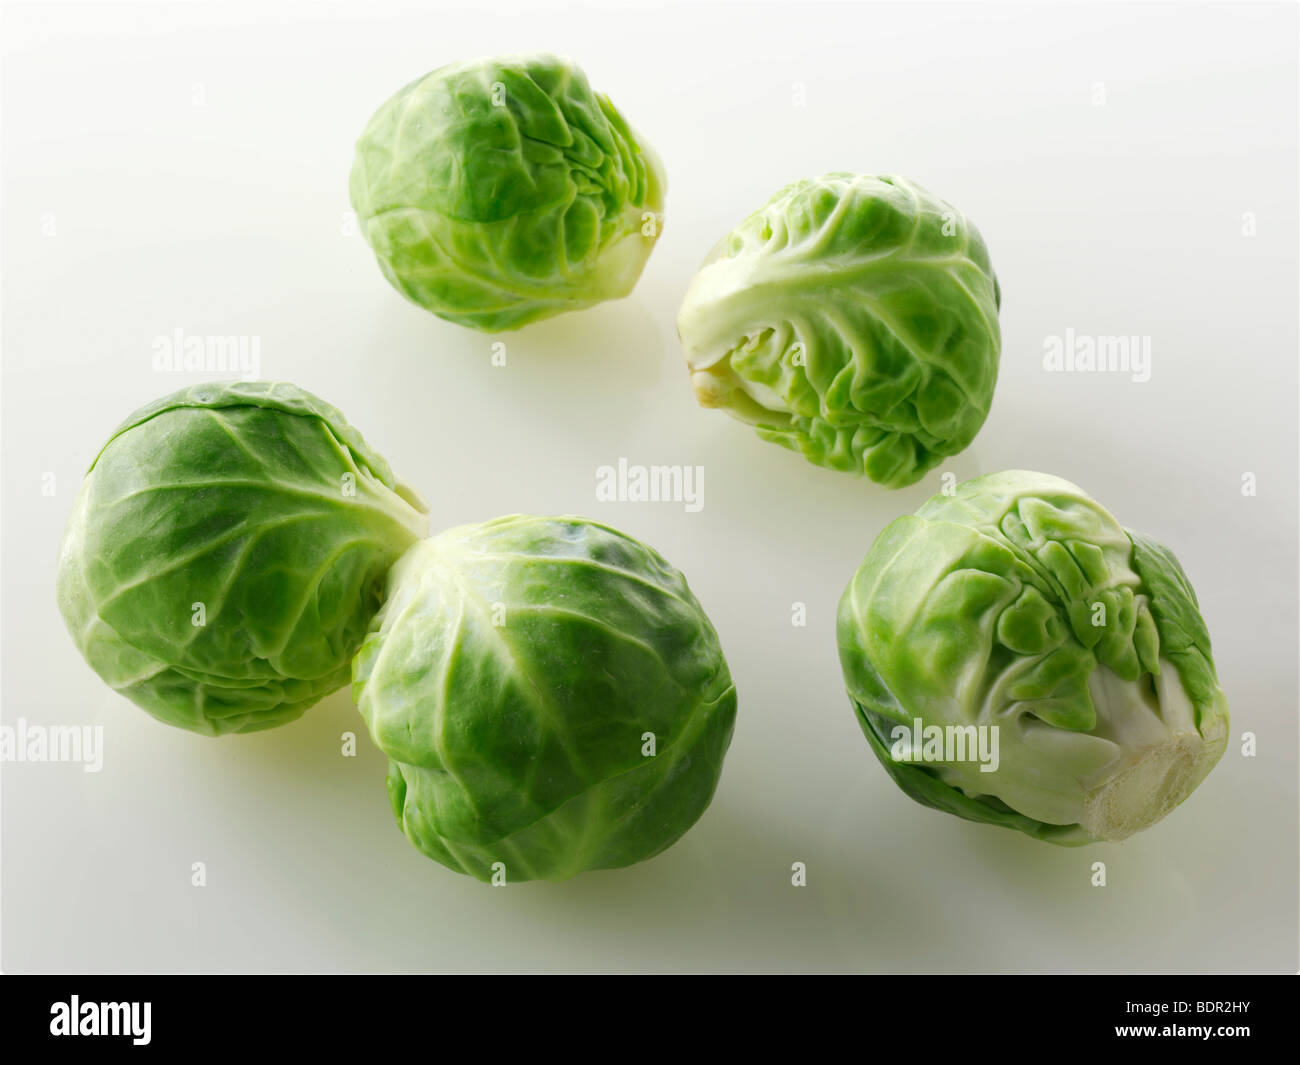 Fresh Brussels Sprouts against a white background Stock Photo